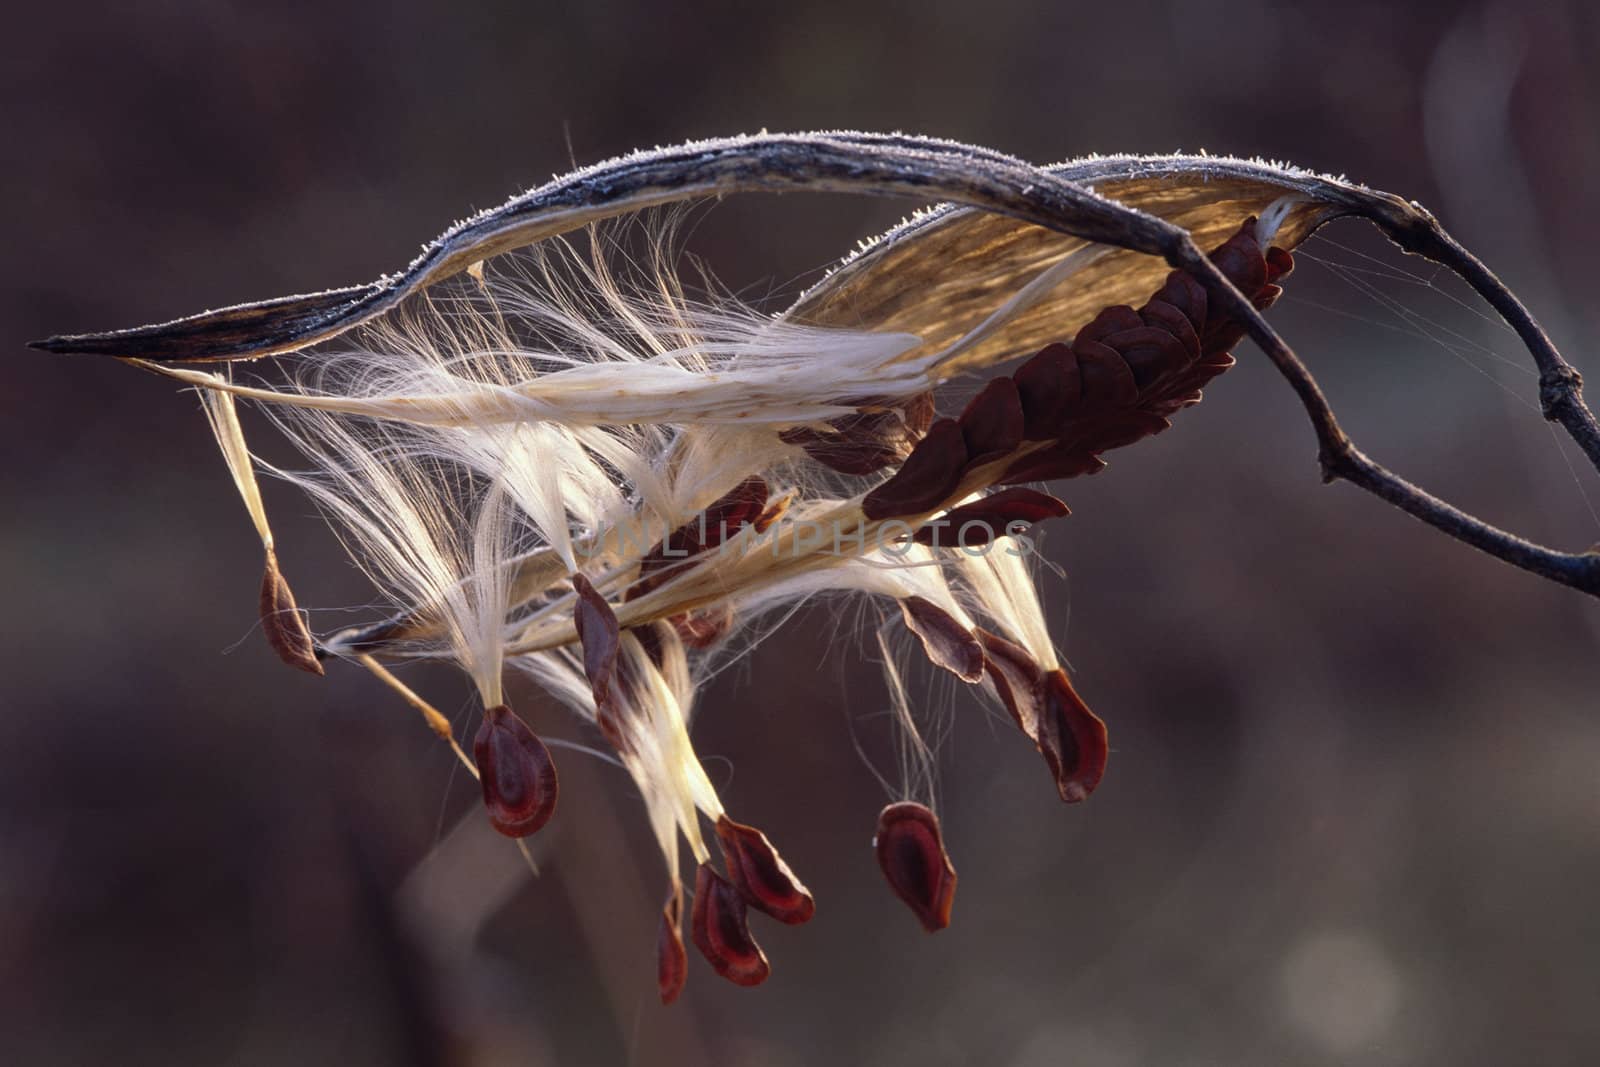 A milkweed seed pod with frost opening to release seeds